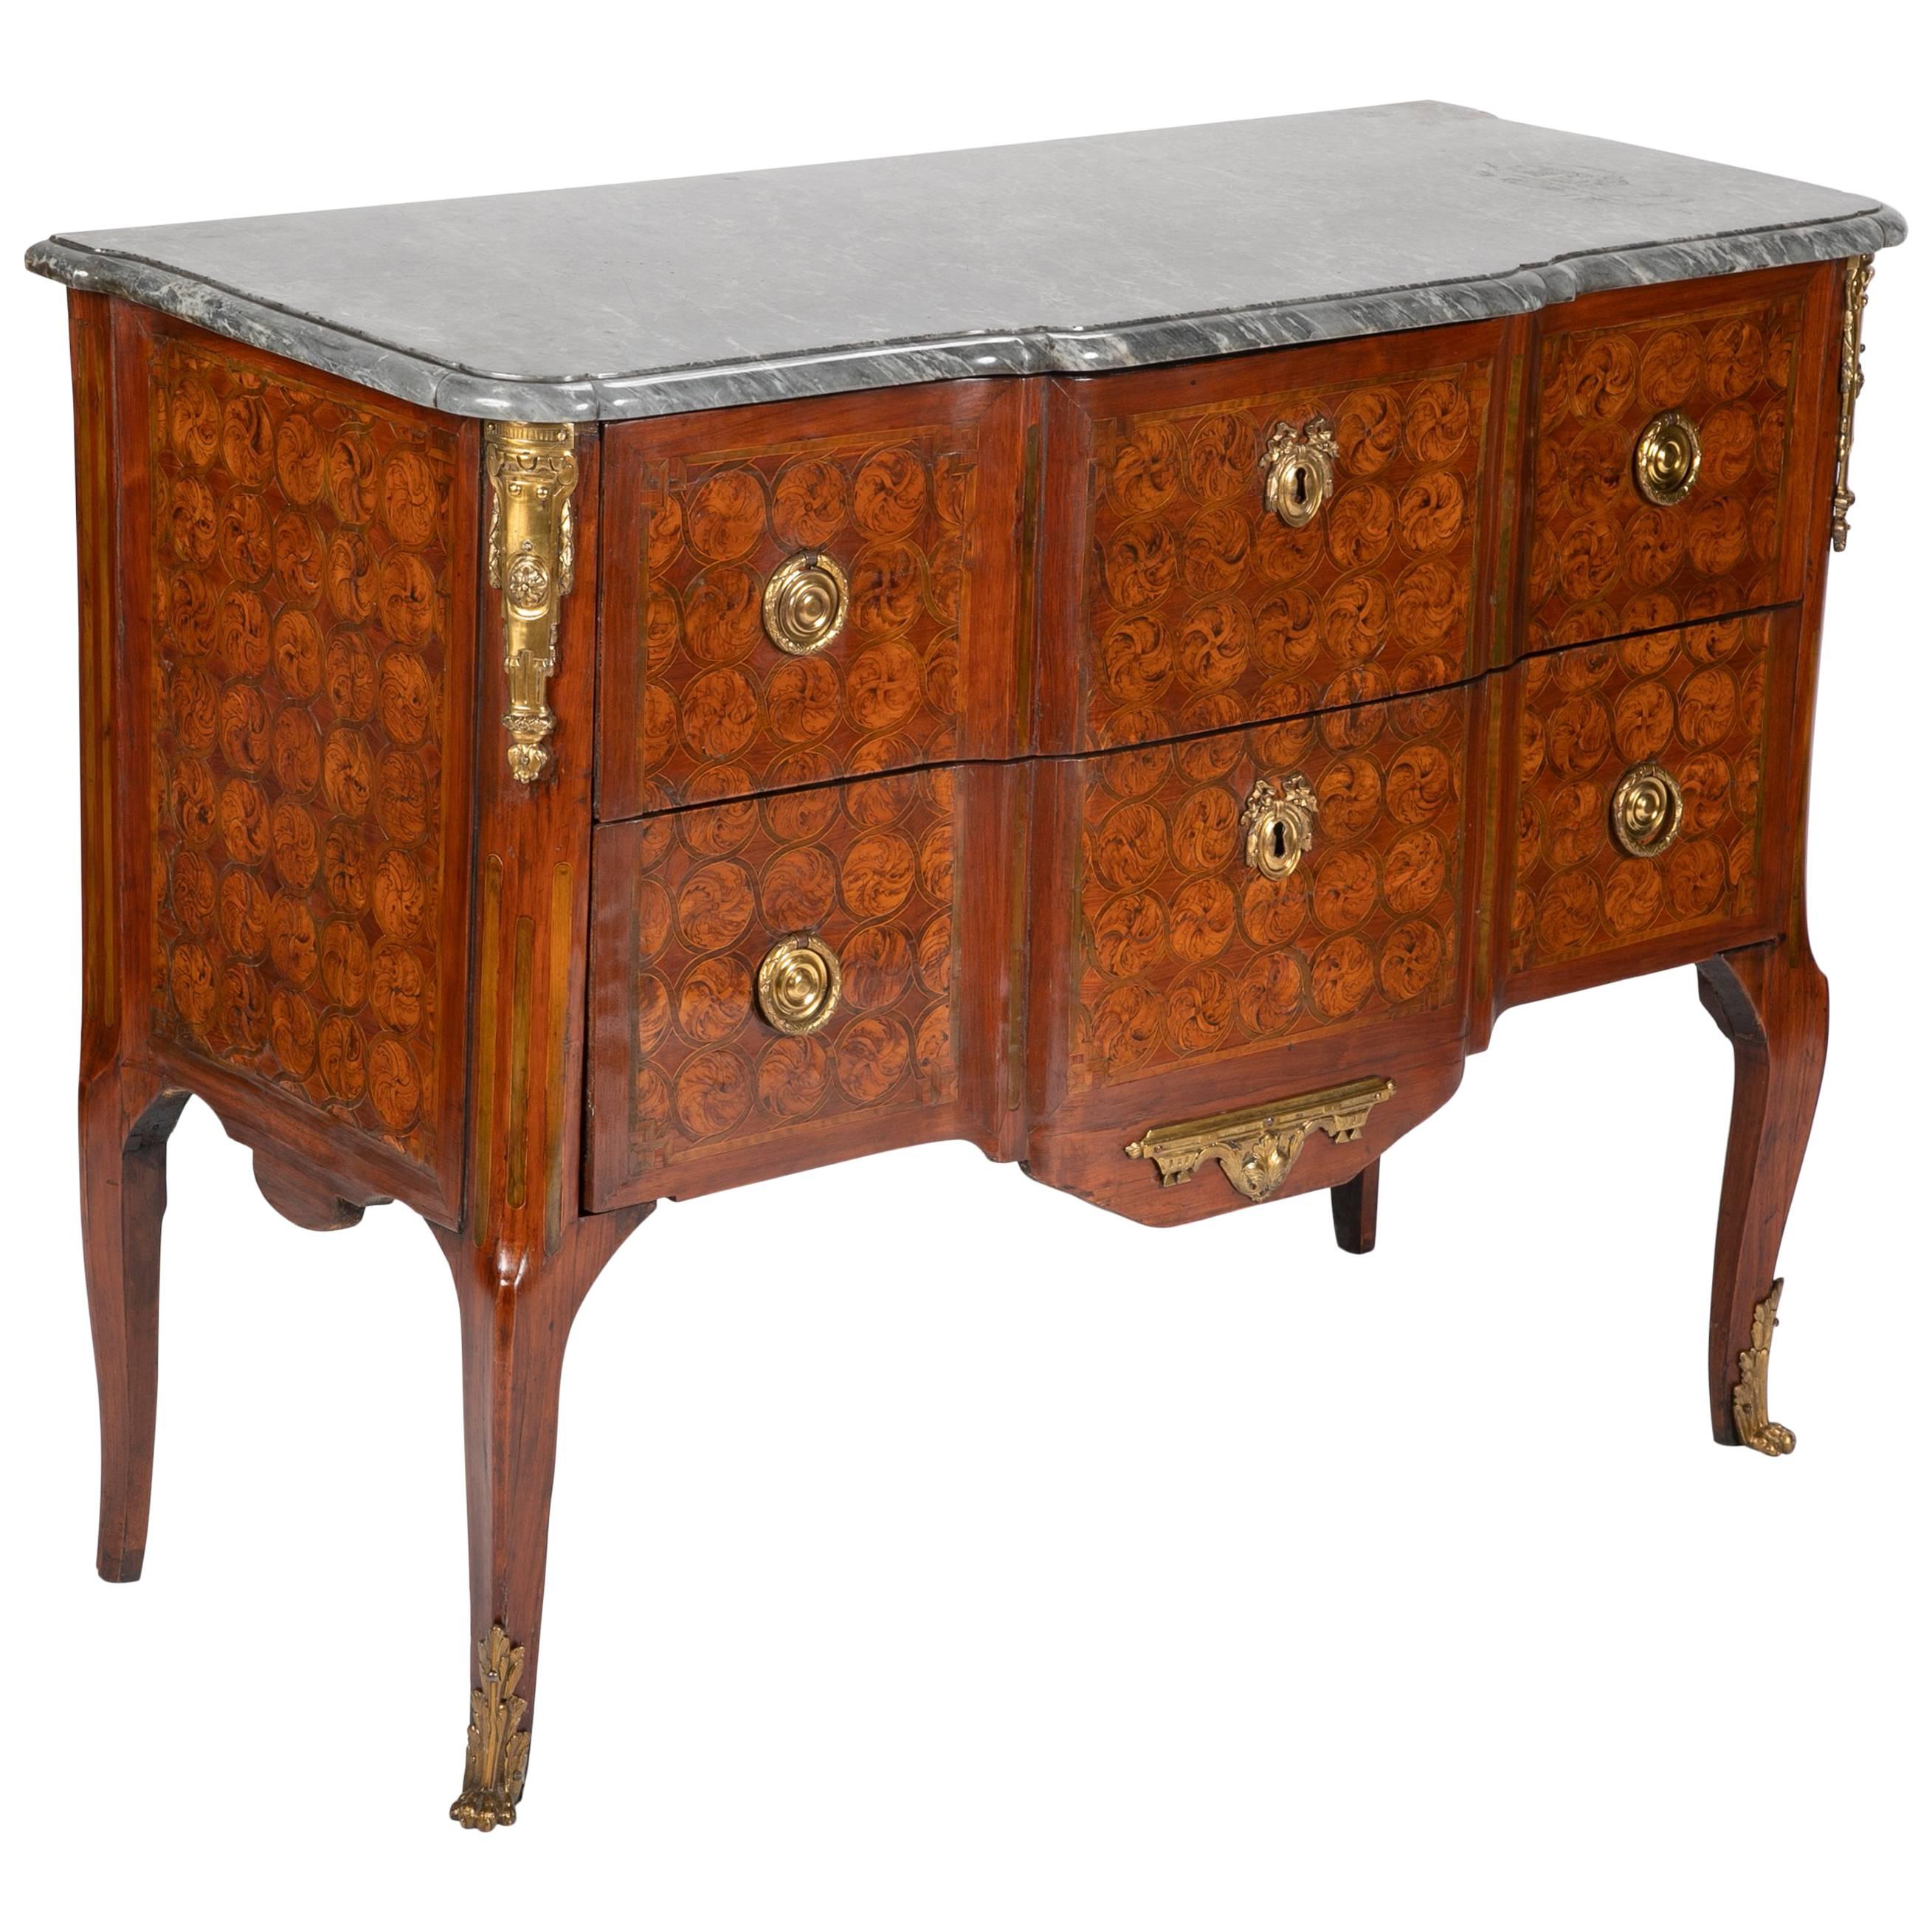 French 18th Century Transitional Period Commode